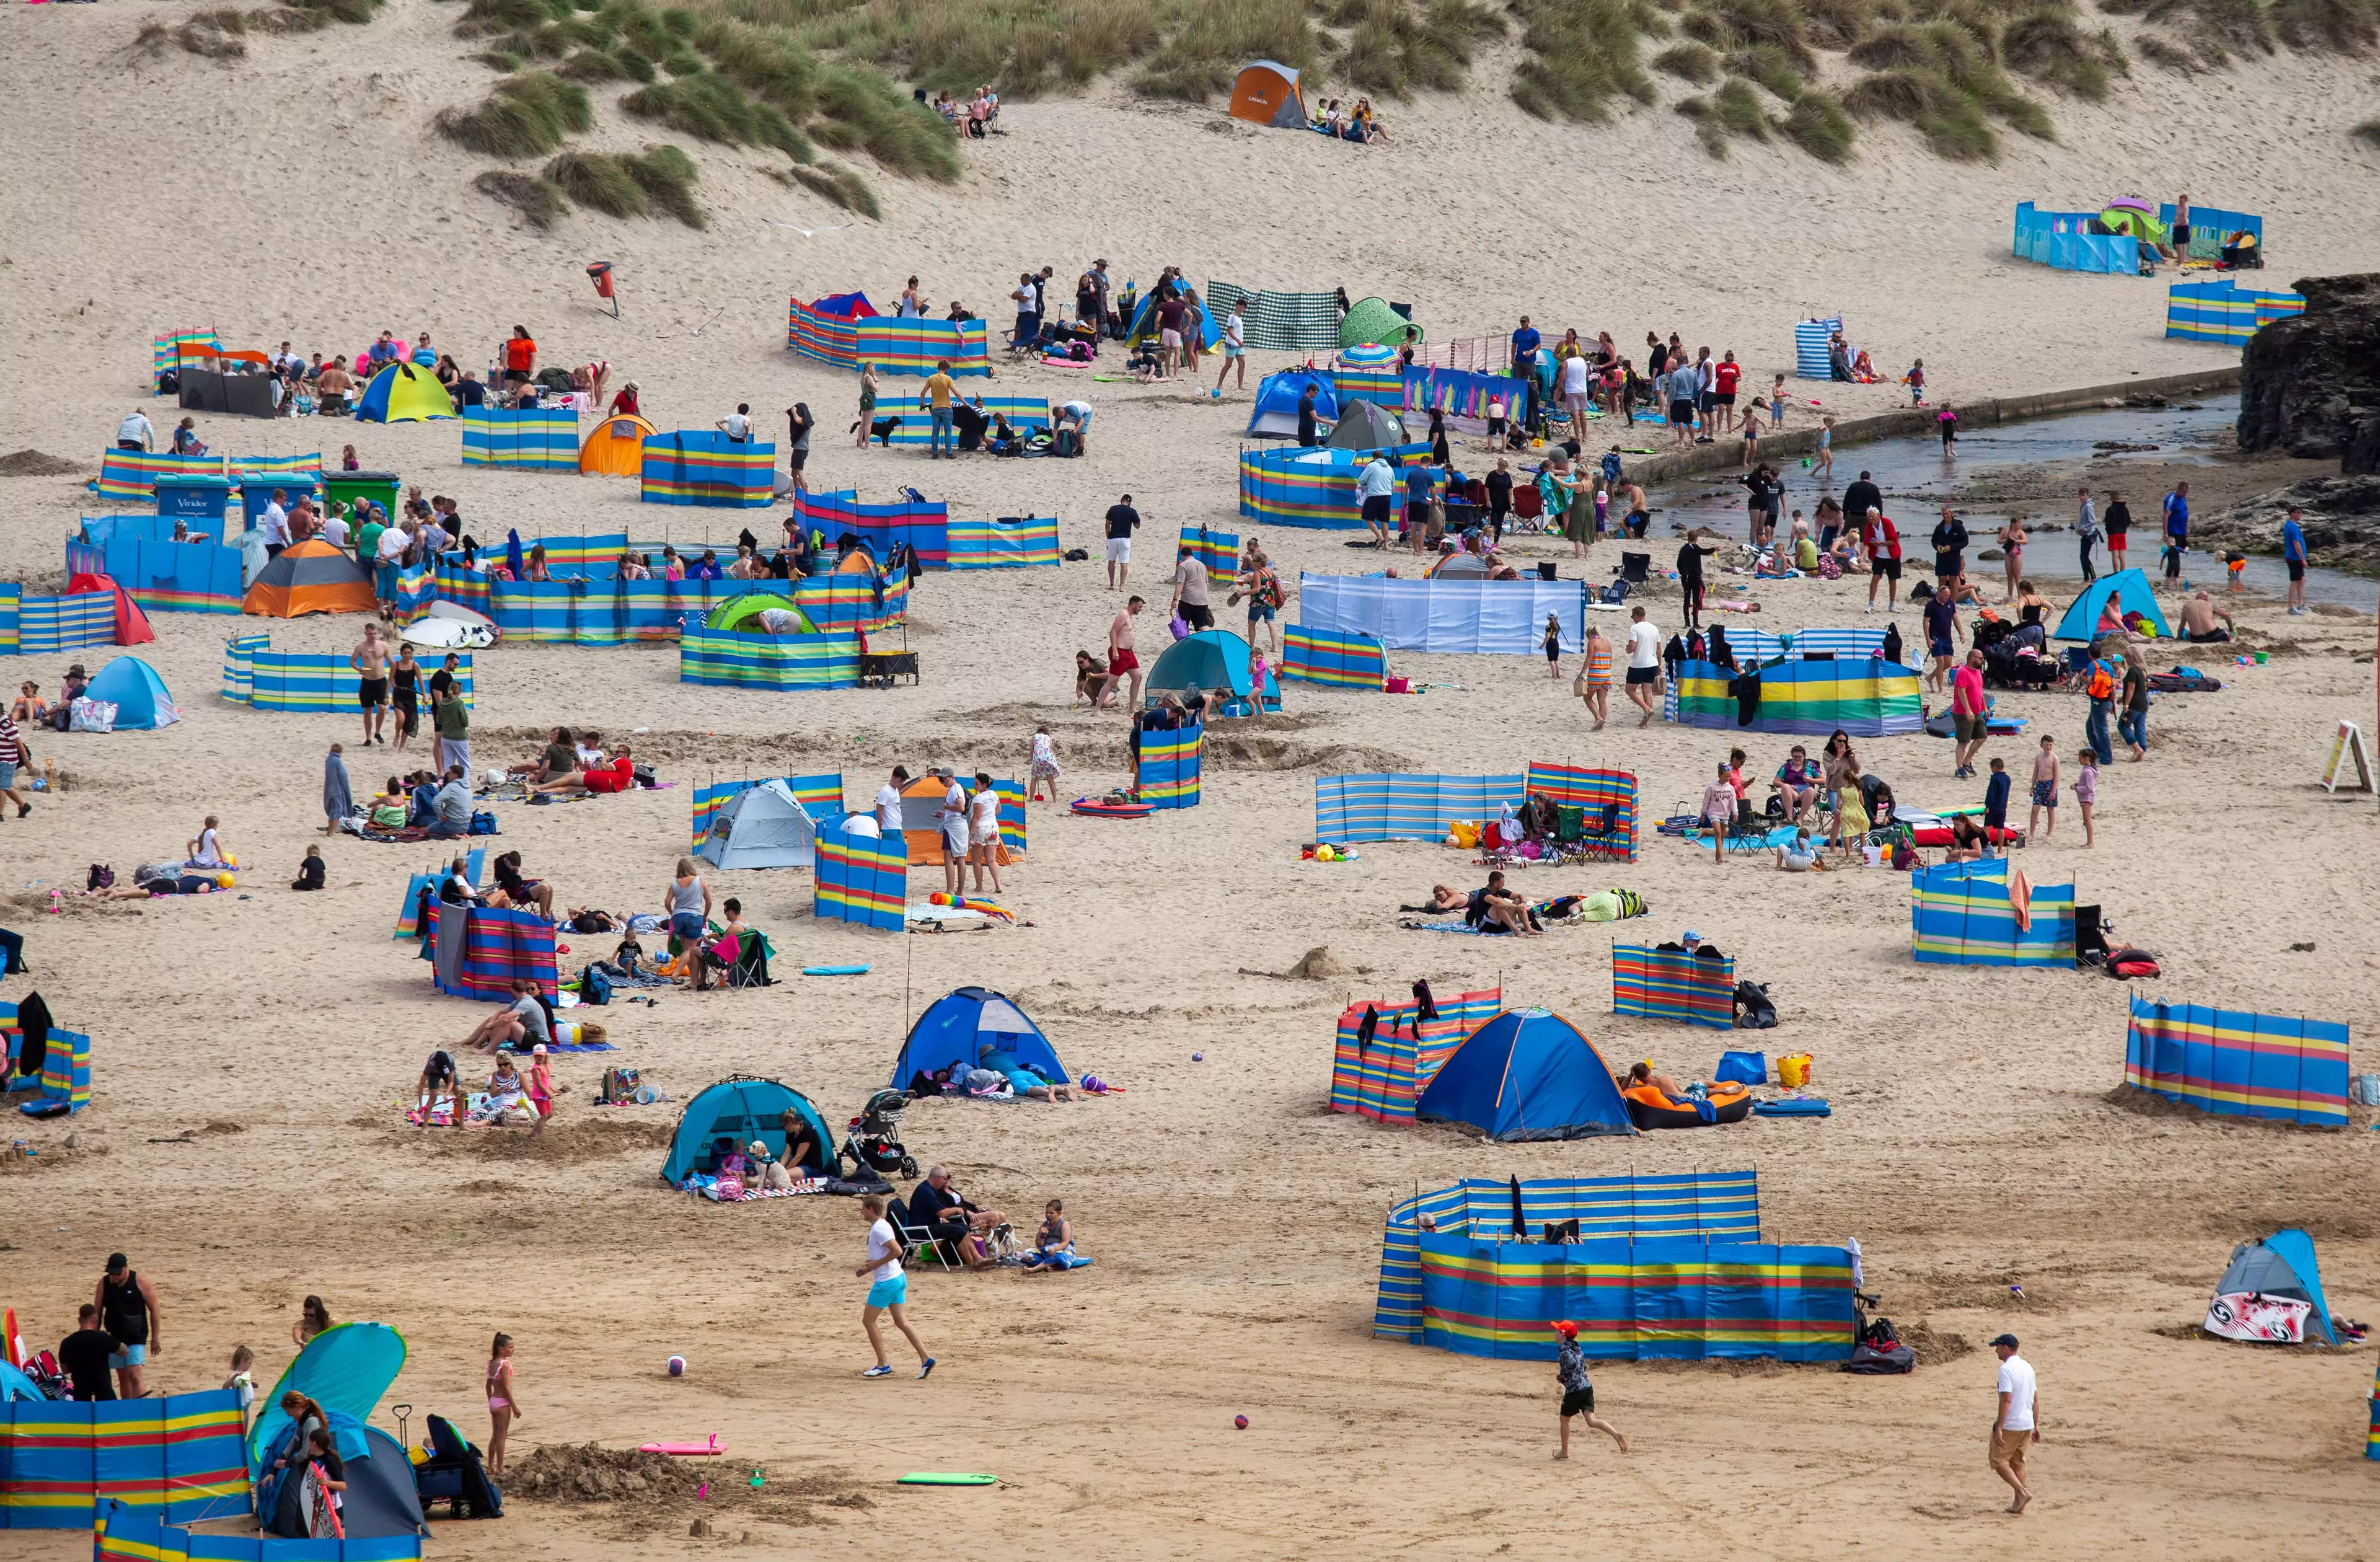 Cornwall's beaches have been packed recently.